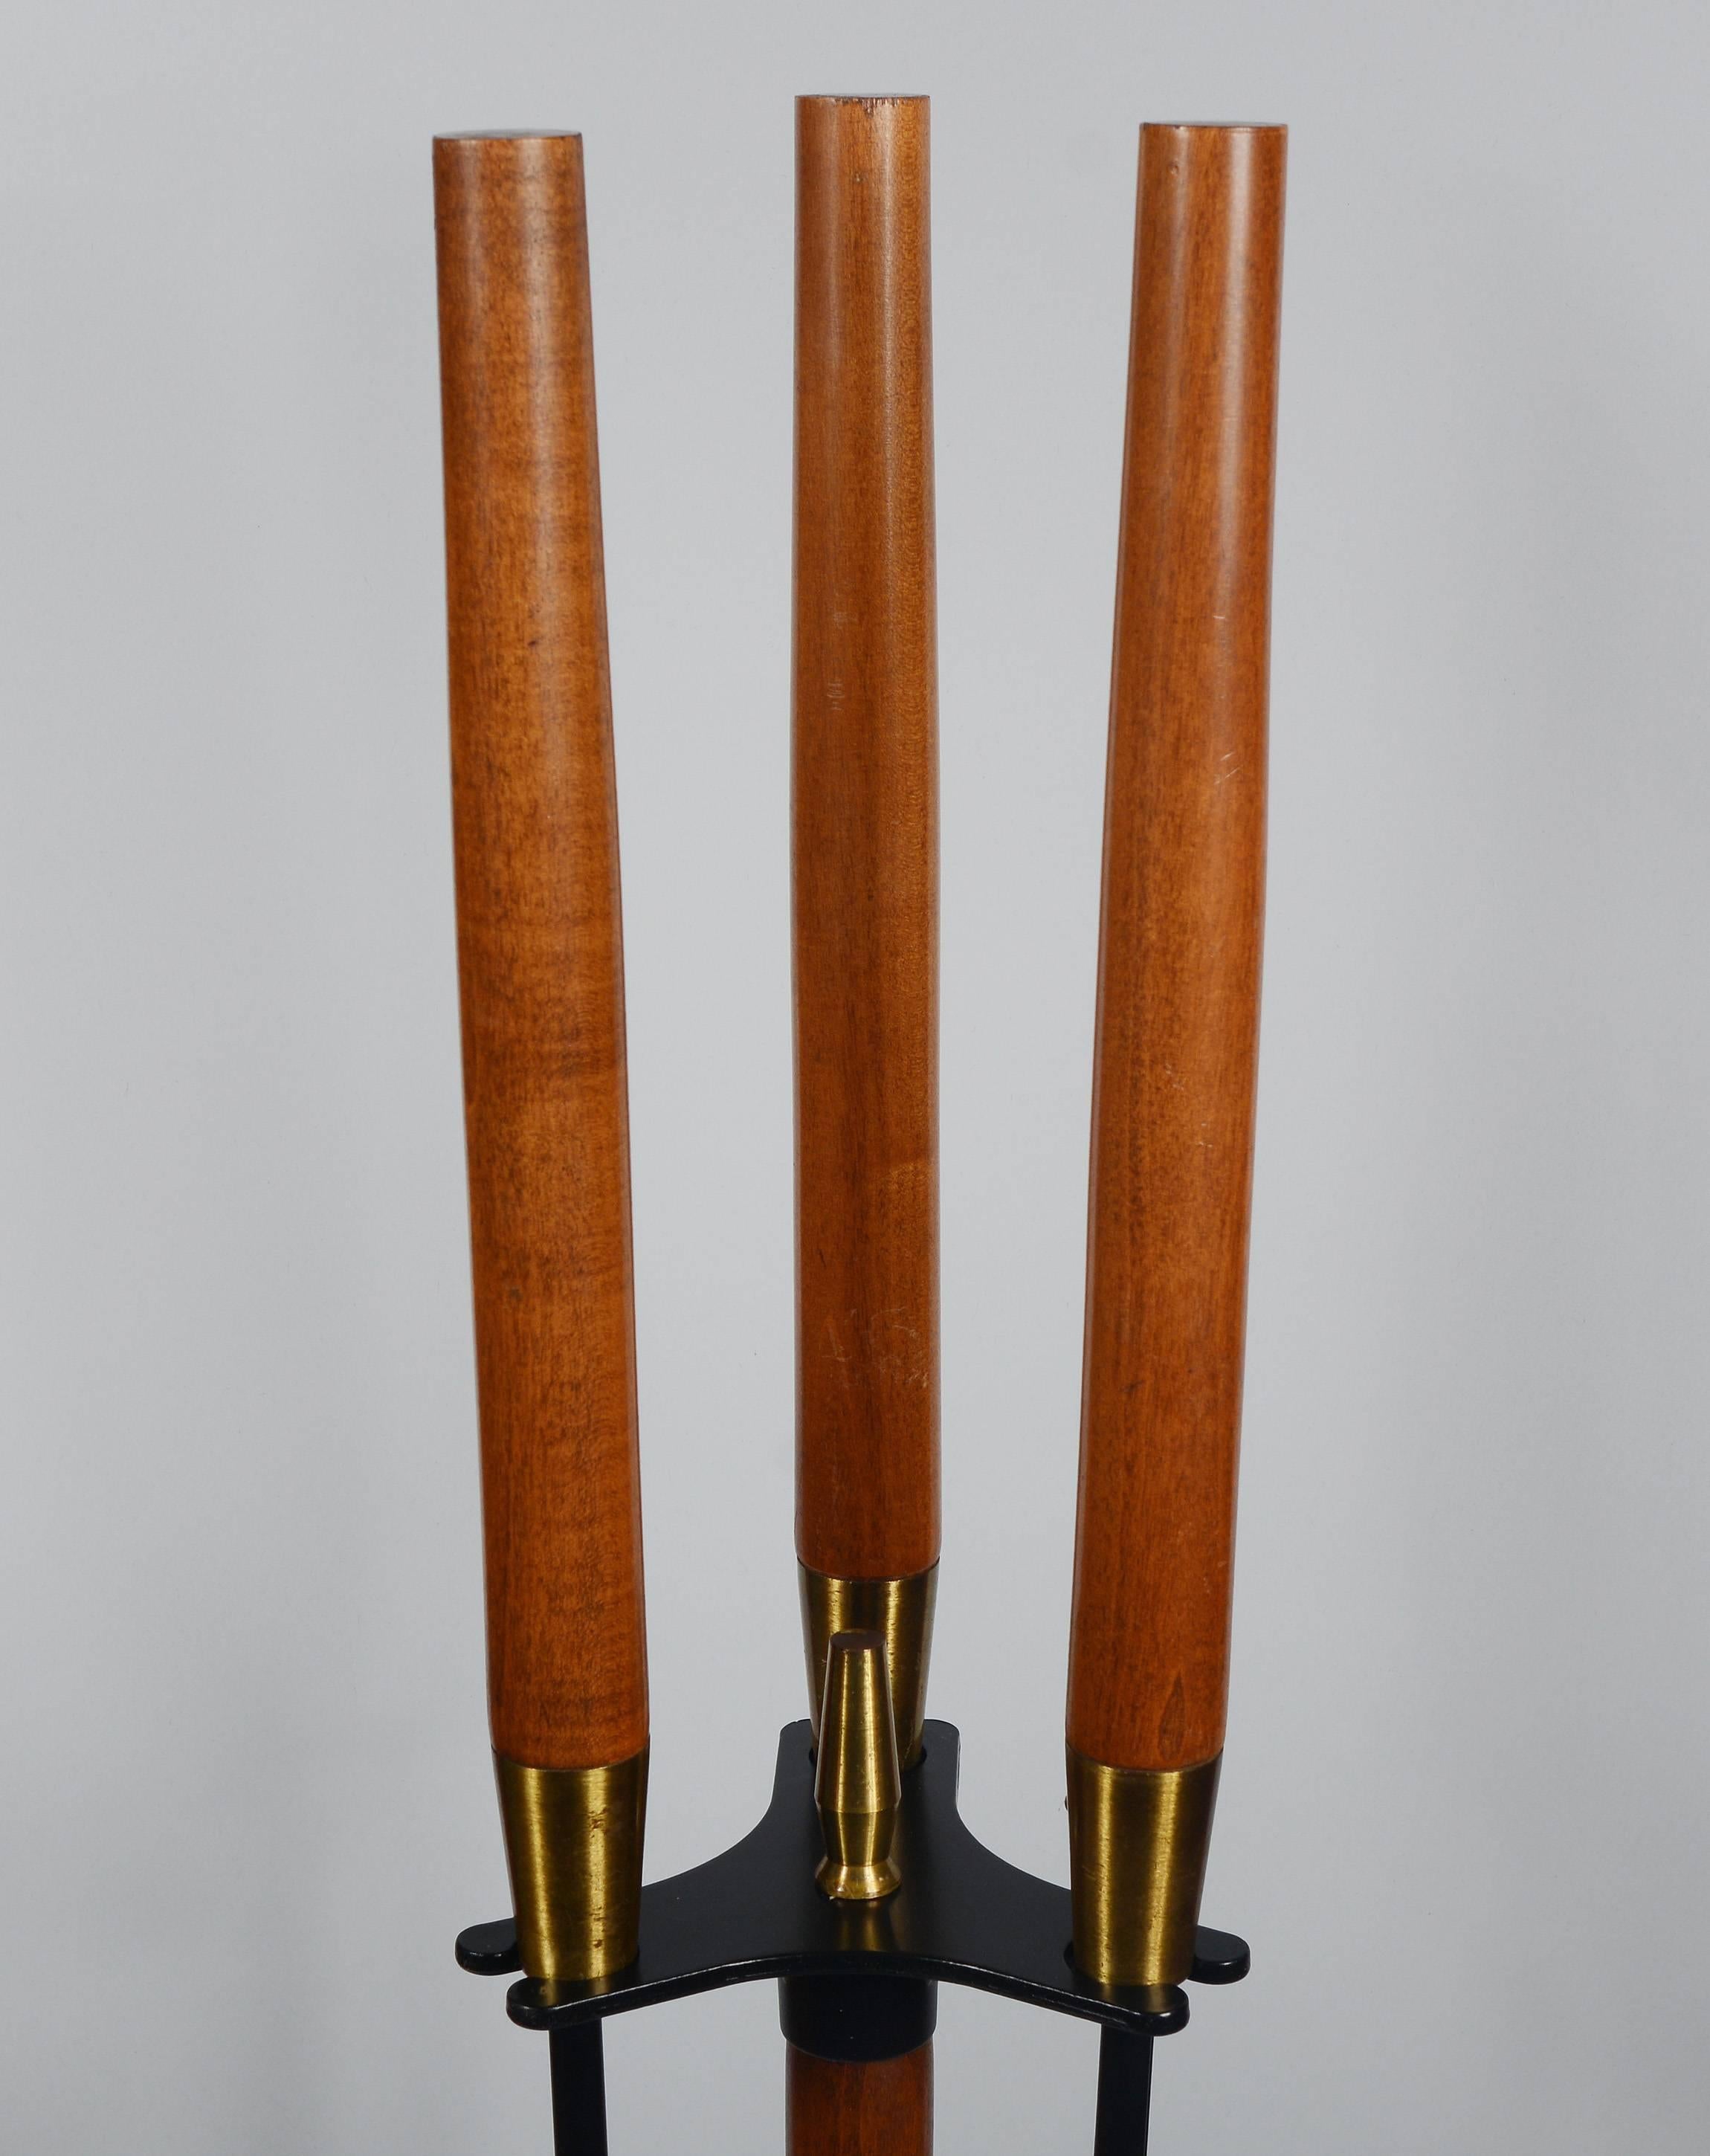 Walnut handled three-piece fireplace tool set by Seymour Manufacturing. These have a brass detail on the handle and the top of the Stand. The set consist of a poker, shovel and broom. The iron has been given a new black lacquer finish. The walnut